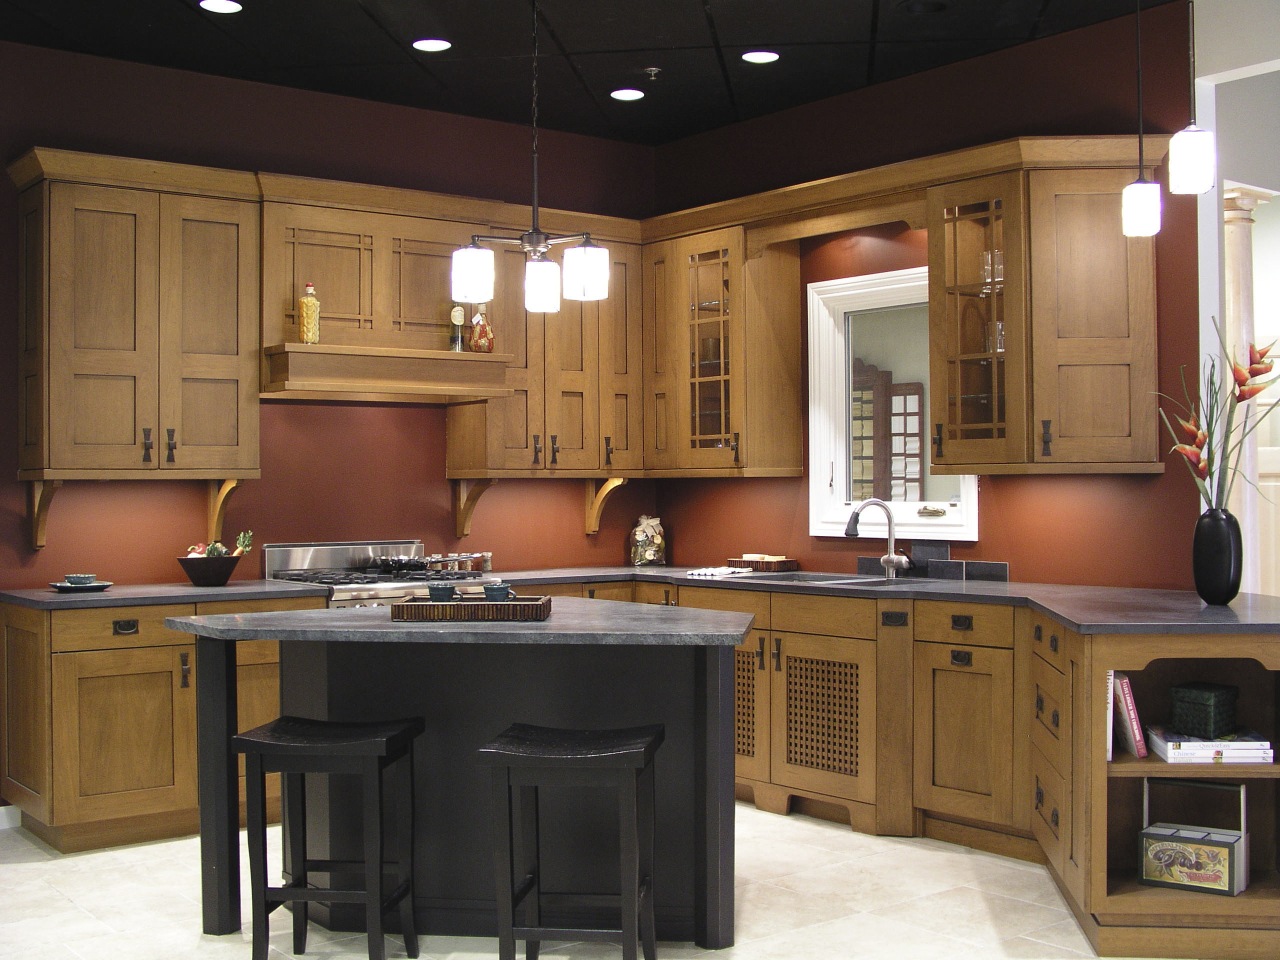 A view of the remodelled interior of this cabinetry, countertop, cuisine classique, furniture, interior design, kitchen, room, under cabinet lighting, black, brown